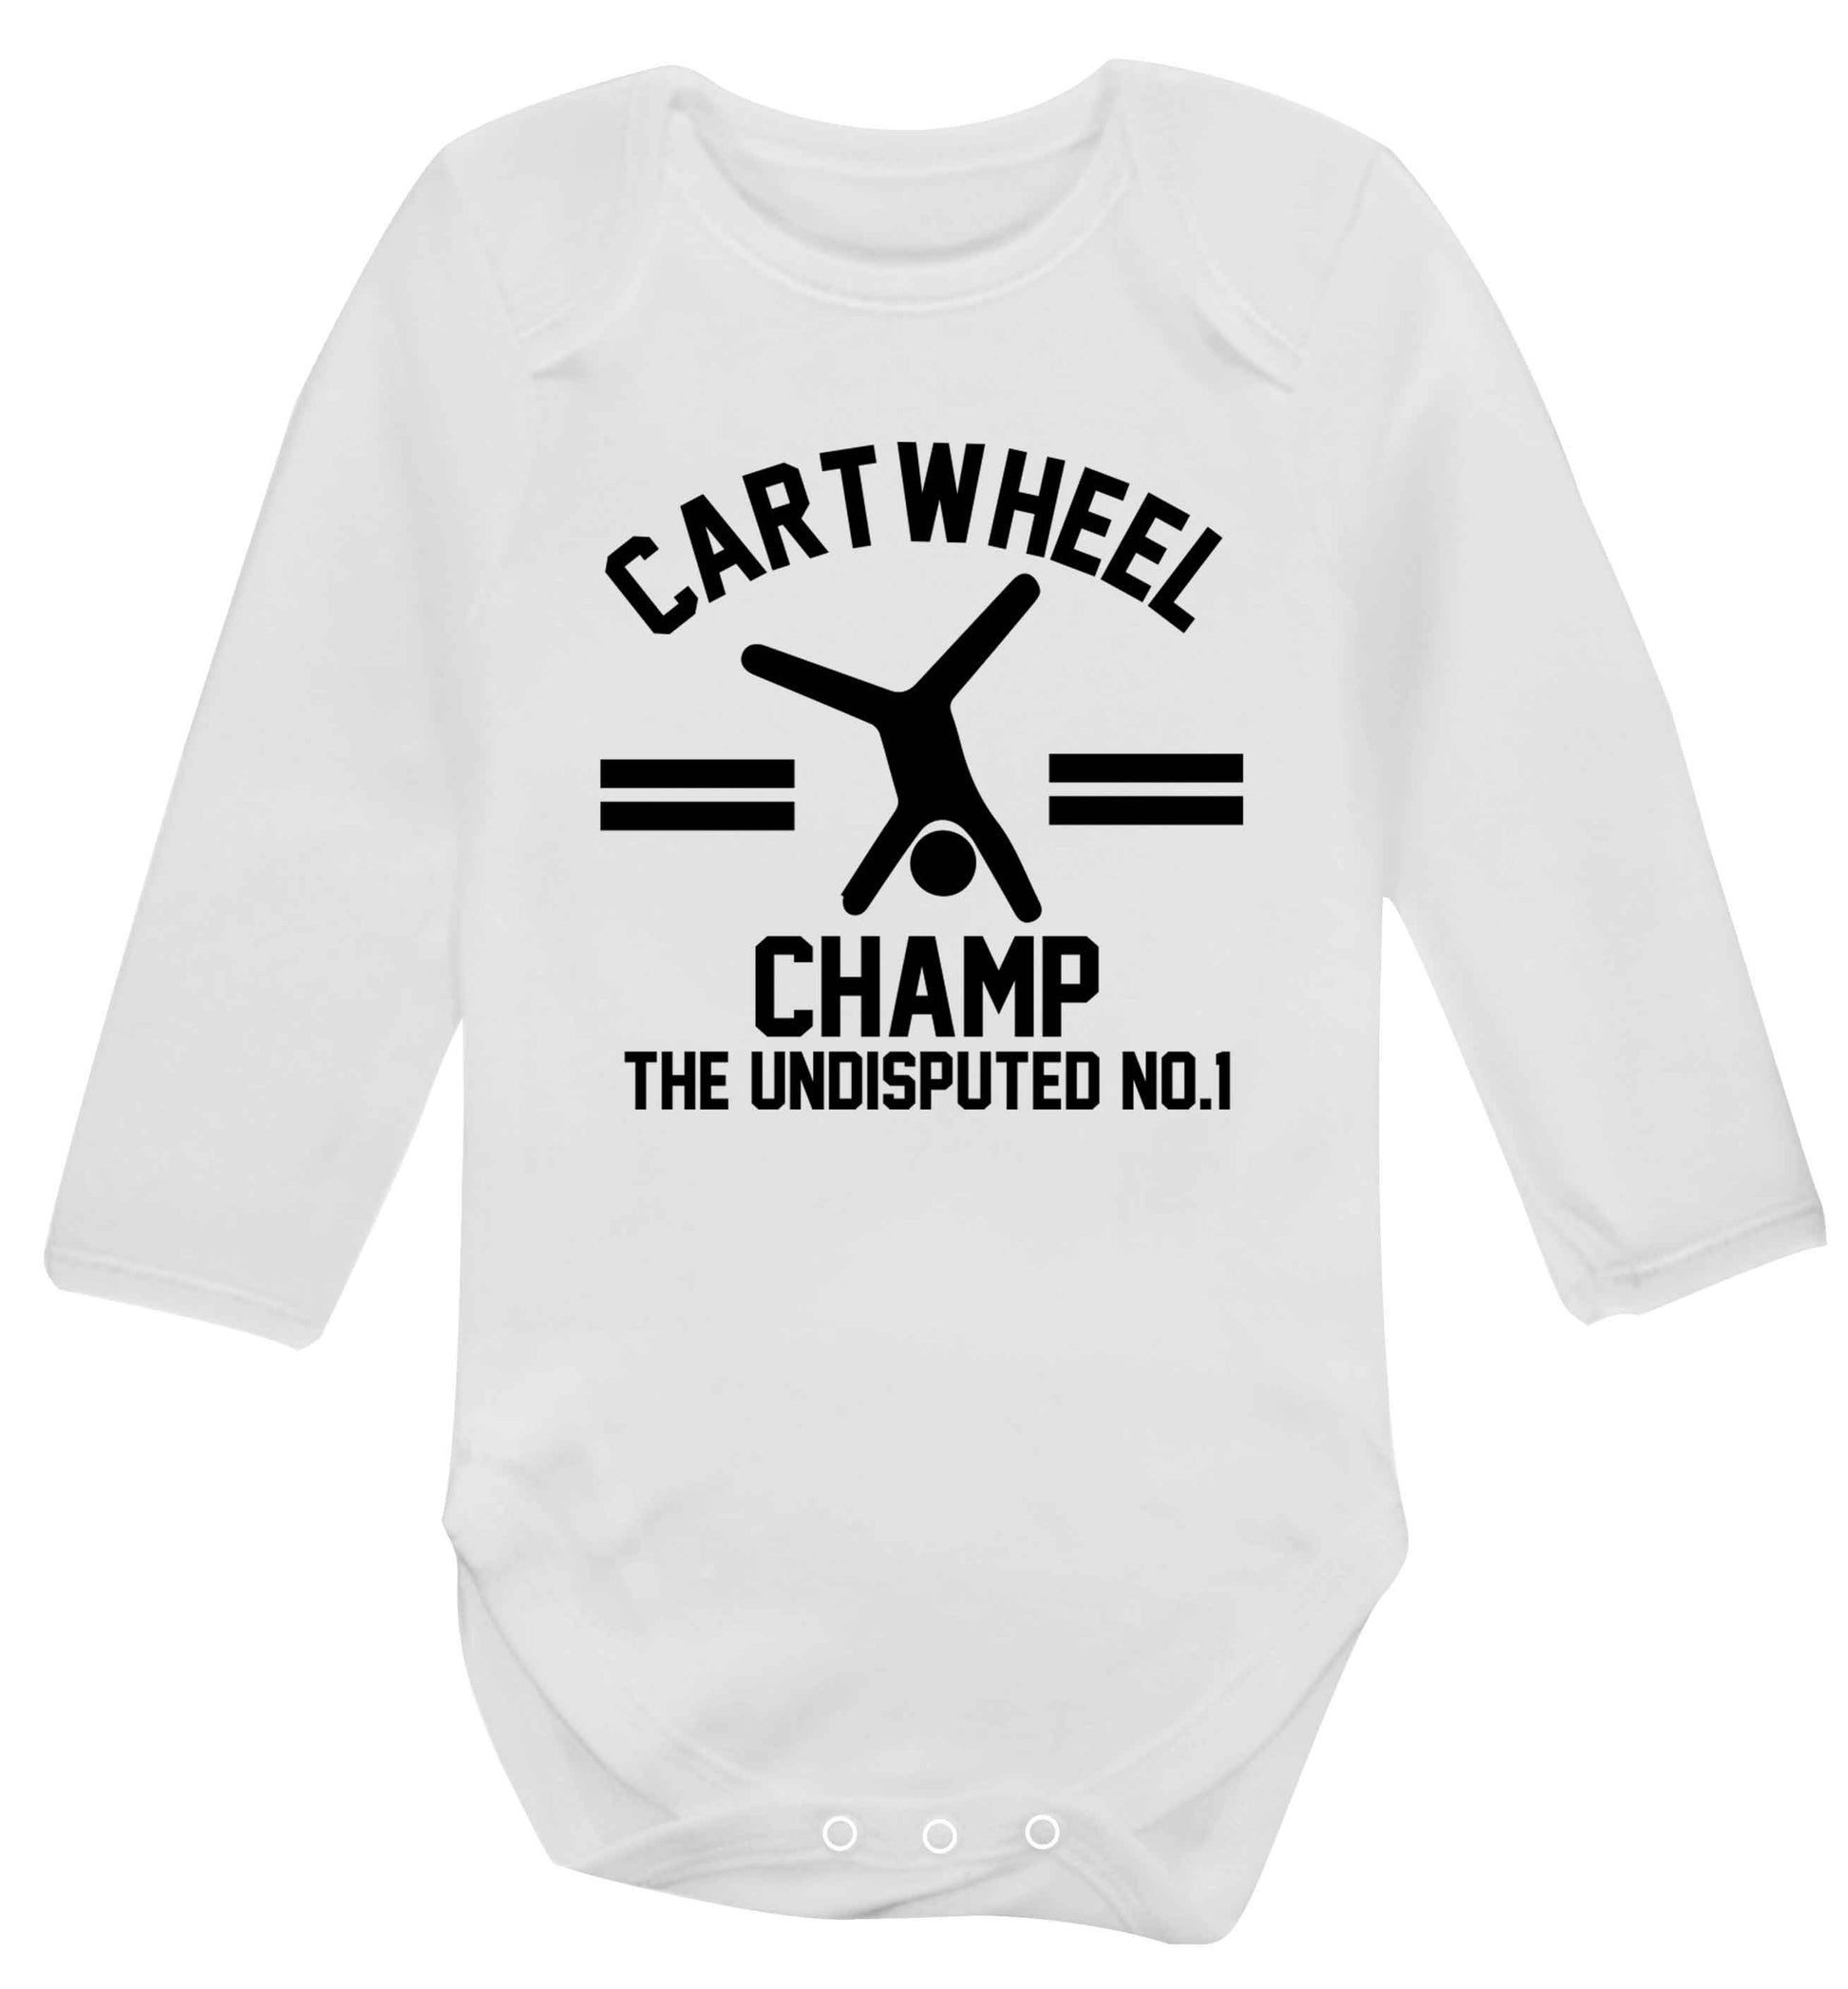 Undisputed cartwheel championship no.1  Baby Vest long sleeved white 6-12 months